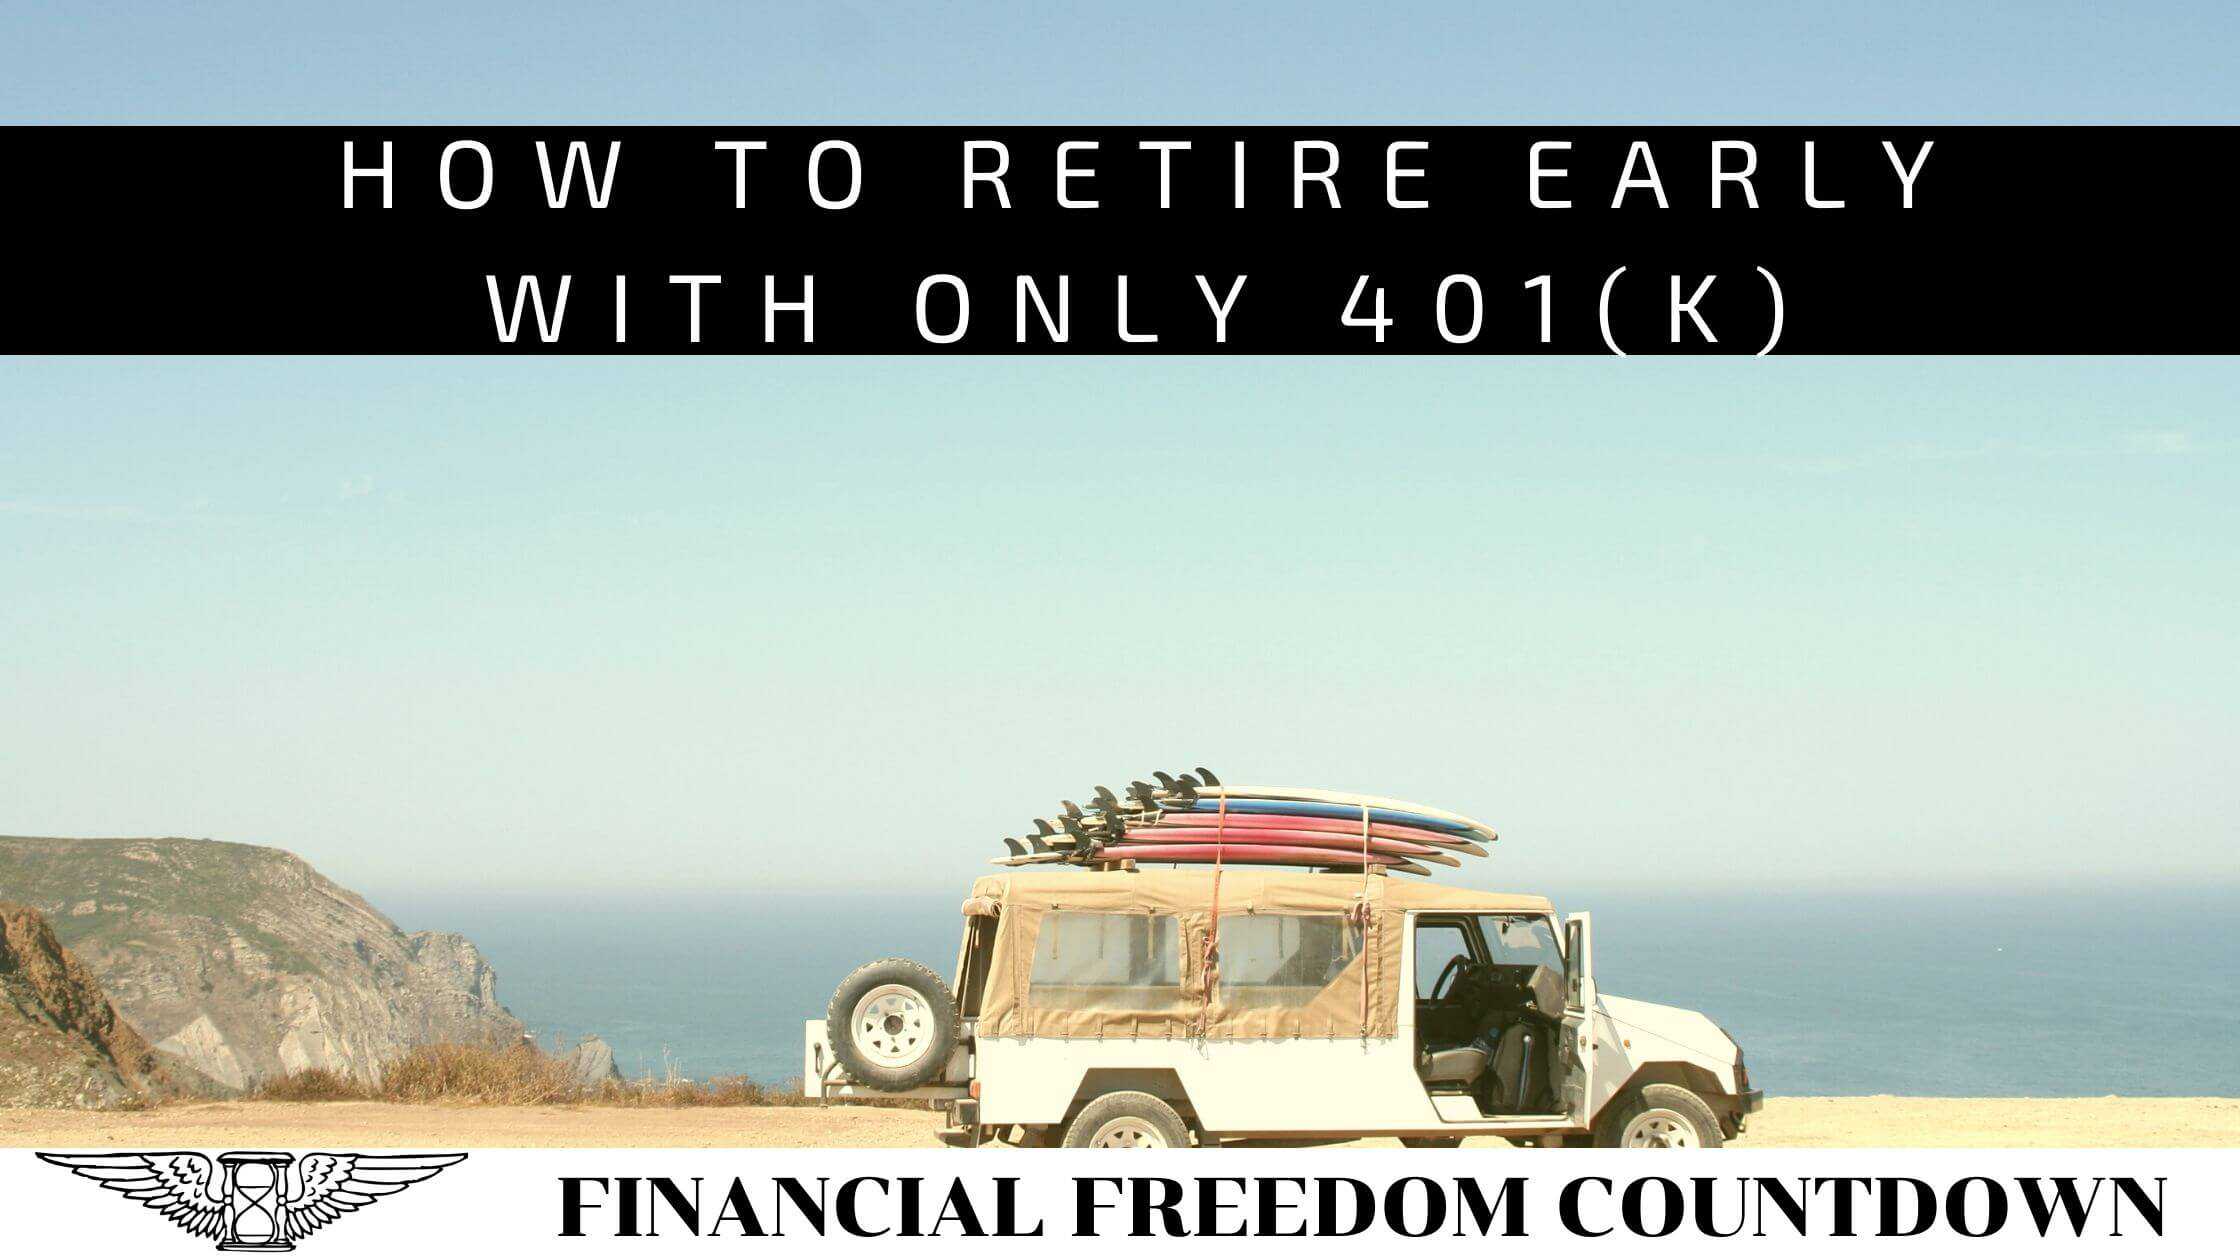 How To Retire Early With 401(K)